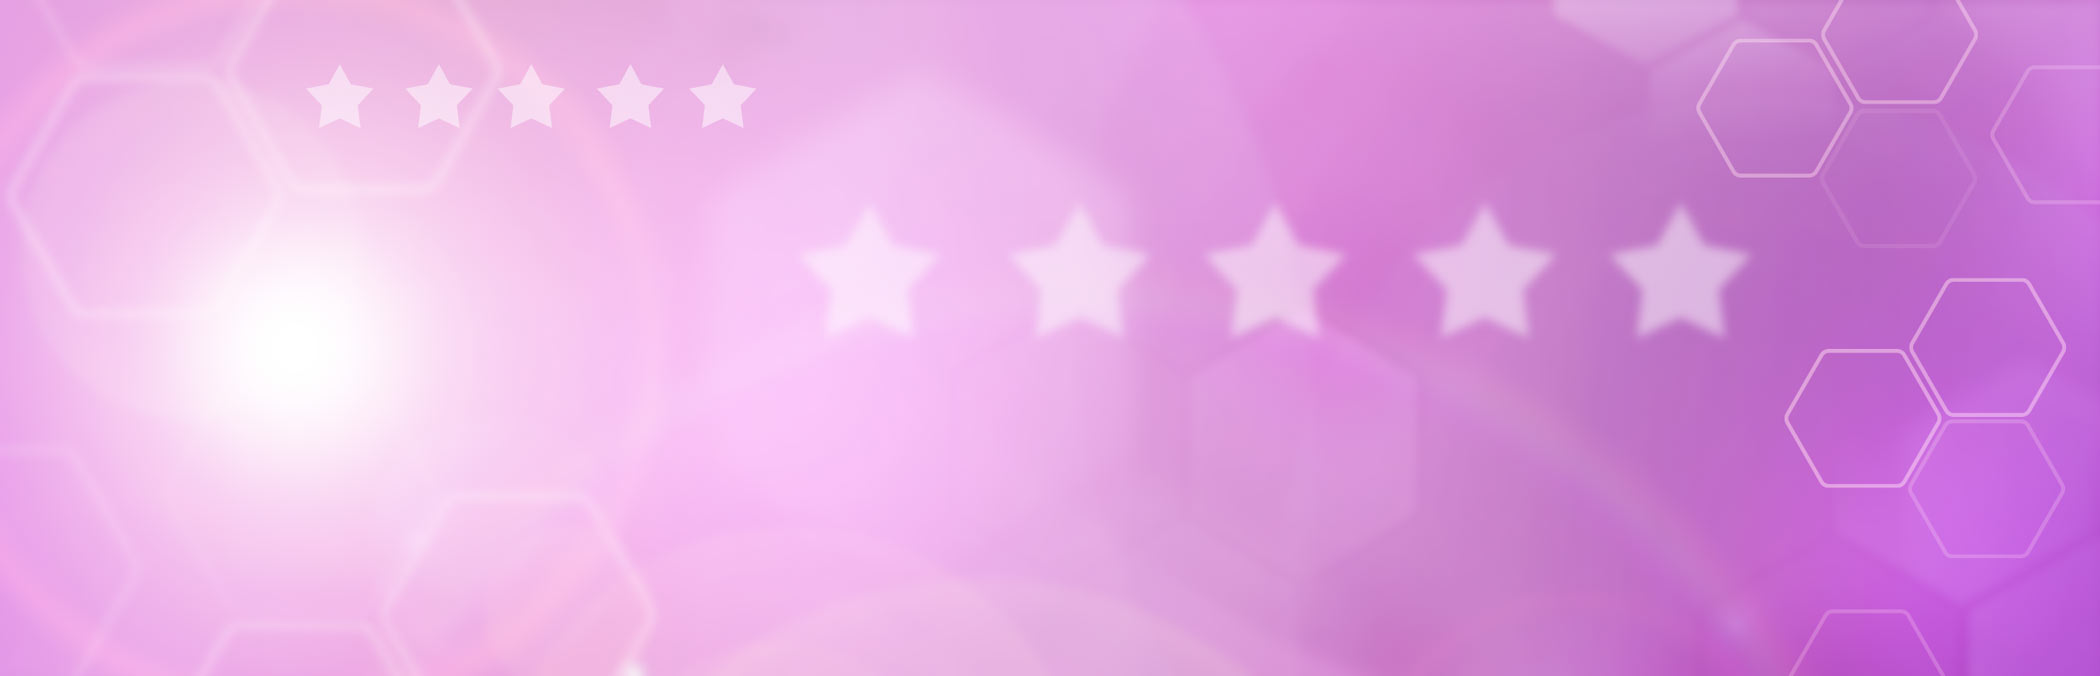 lilac colored background with stars